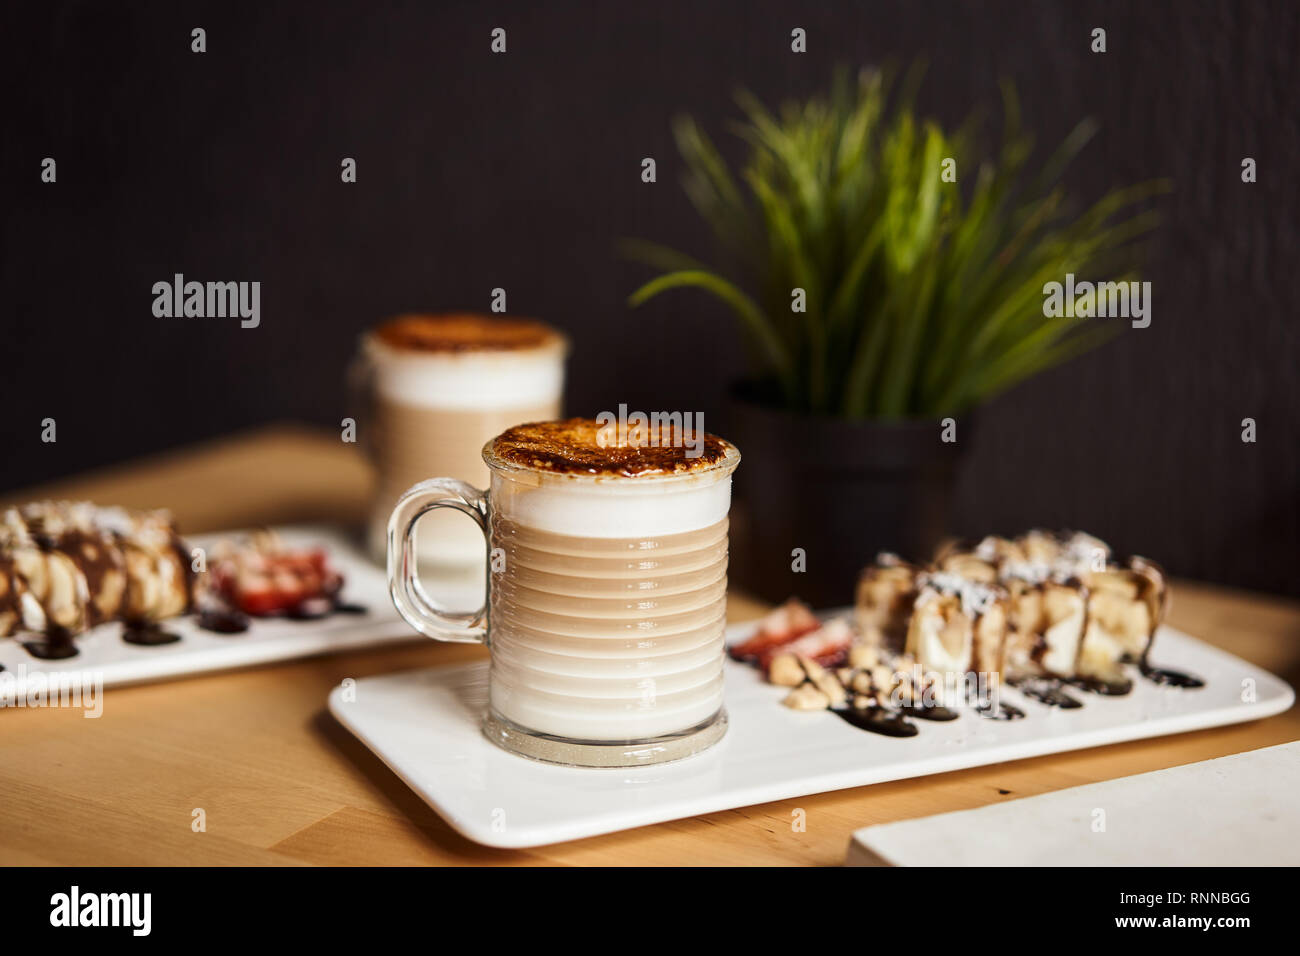 Two Cups Of Hot Latte With Baked Caramel Crust And Sweet Roll With Banana And Strawberry On The Wooden Table In Coffe Shop Coffee Concept Stock Photo Alamy